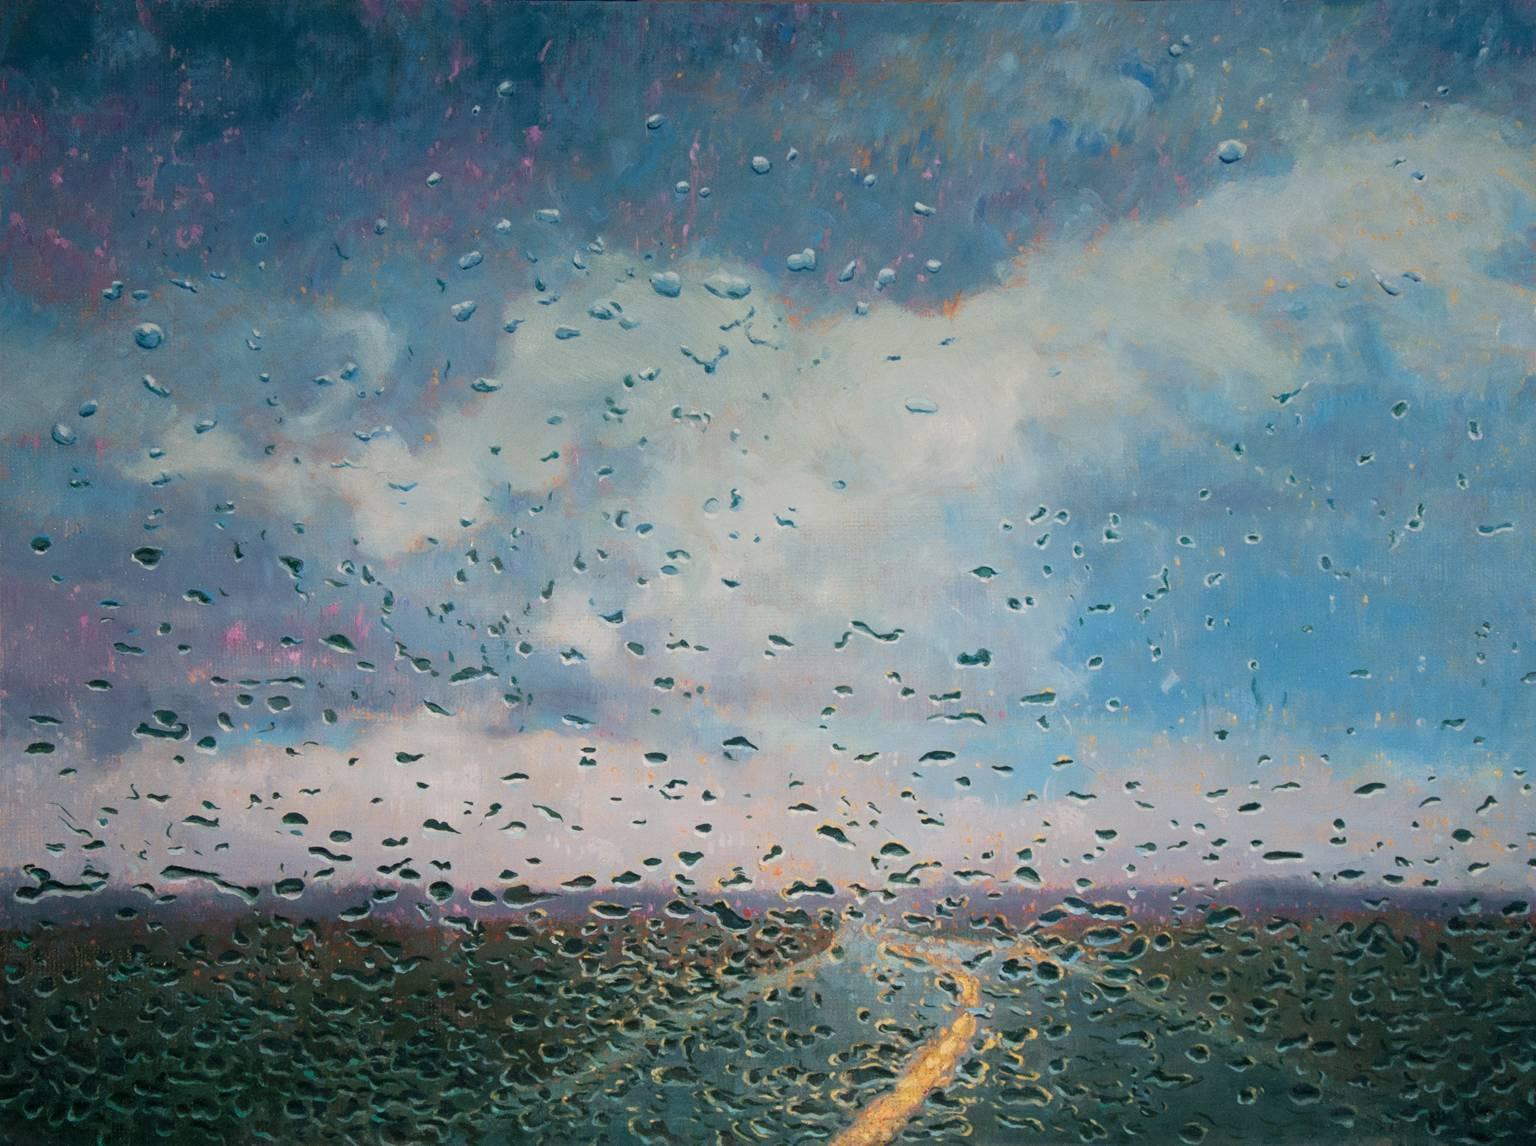 Daily Conditions on Chain of Craters Road - Painting by Katherine Kean